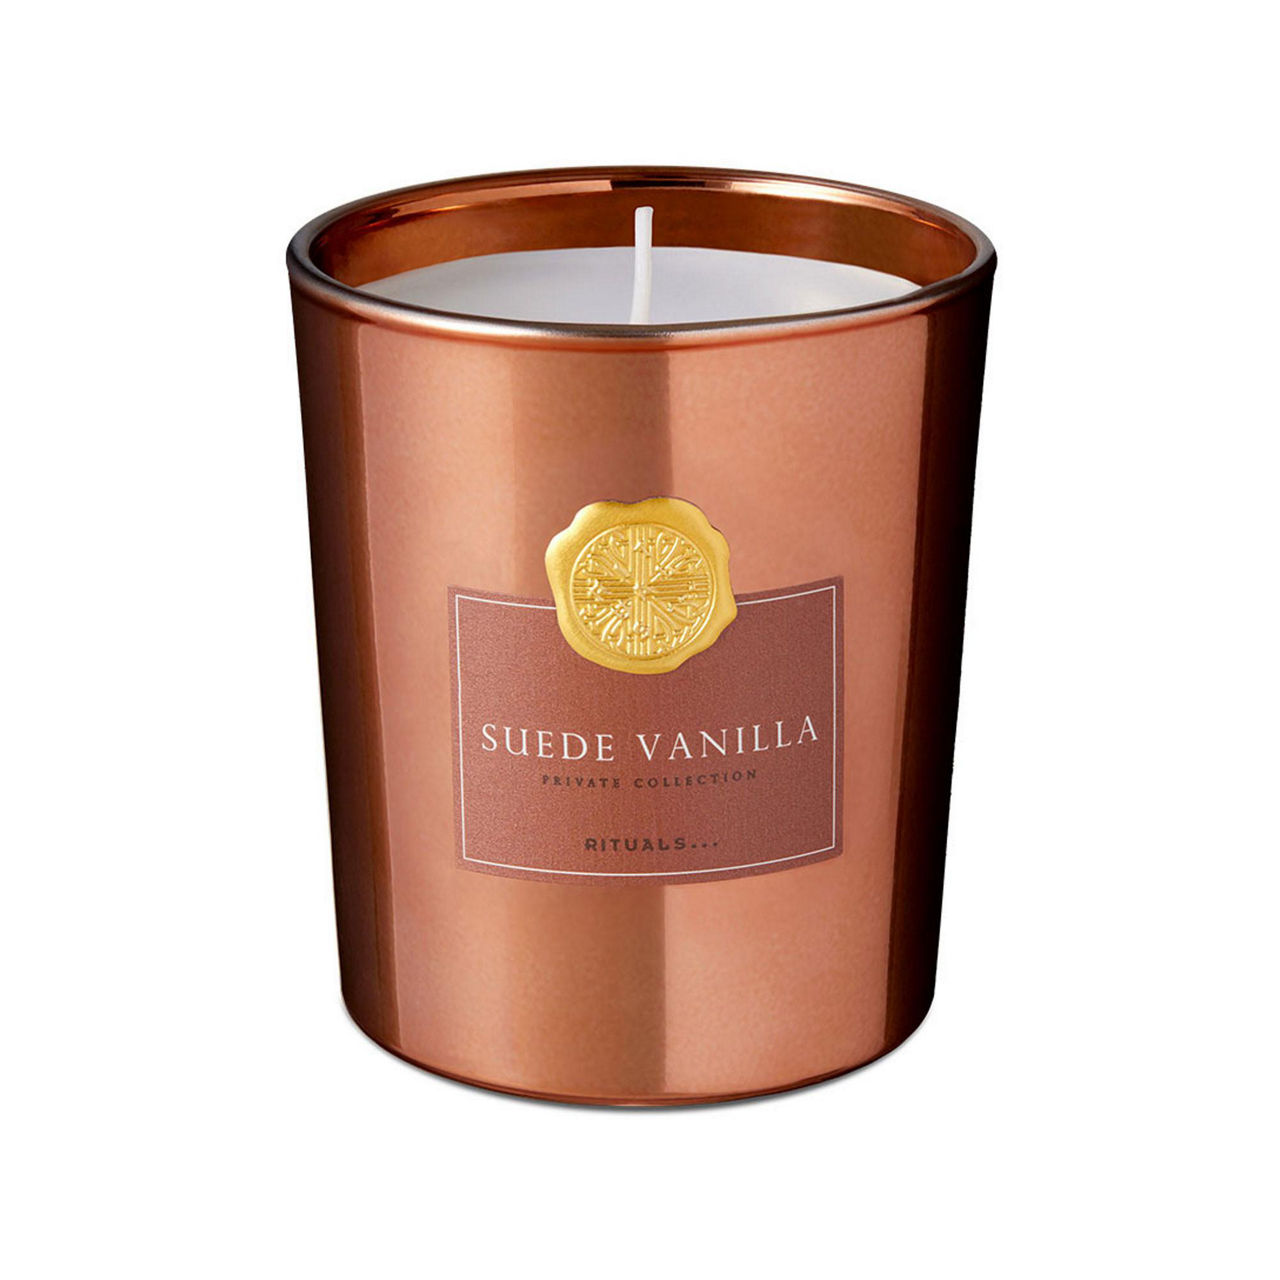 RITUALS Suede Vanilla Scented Candle